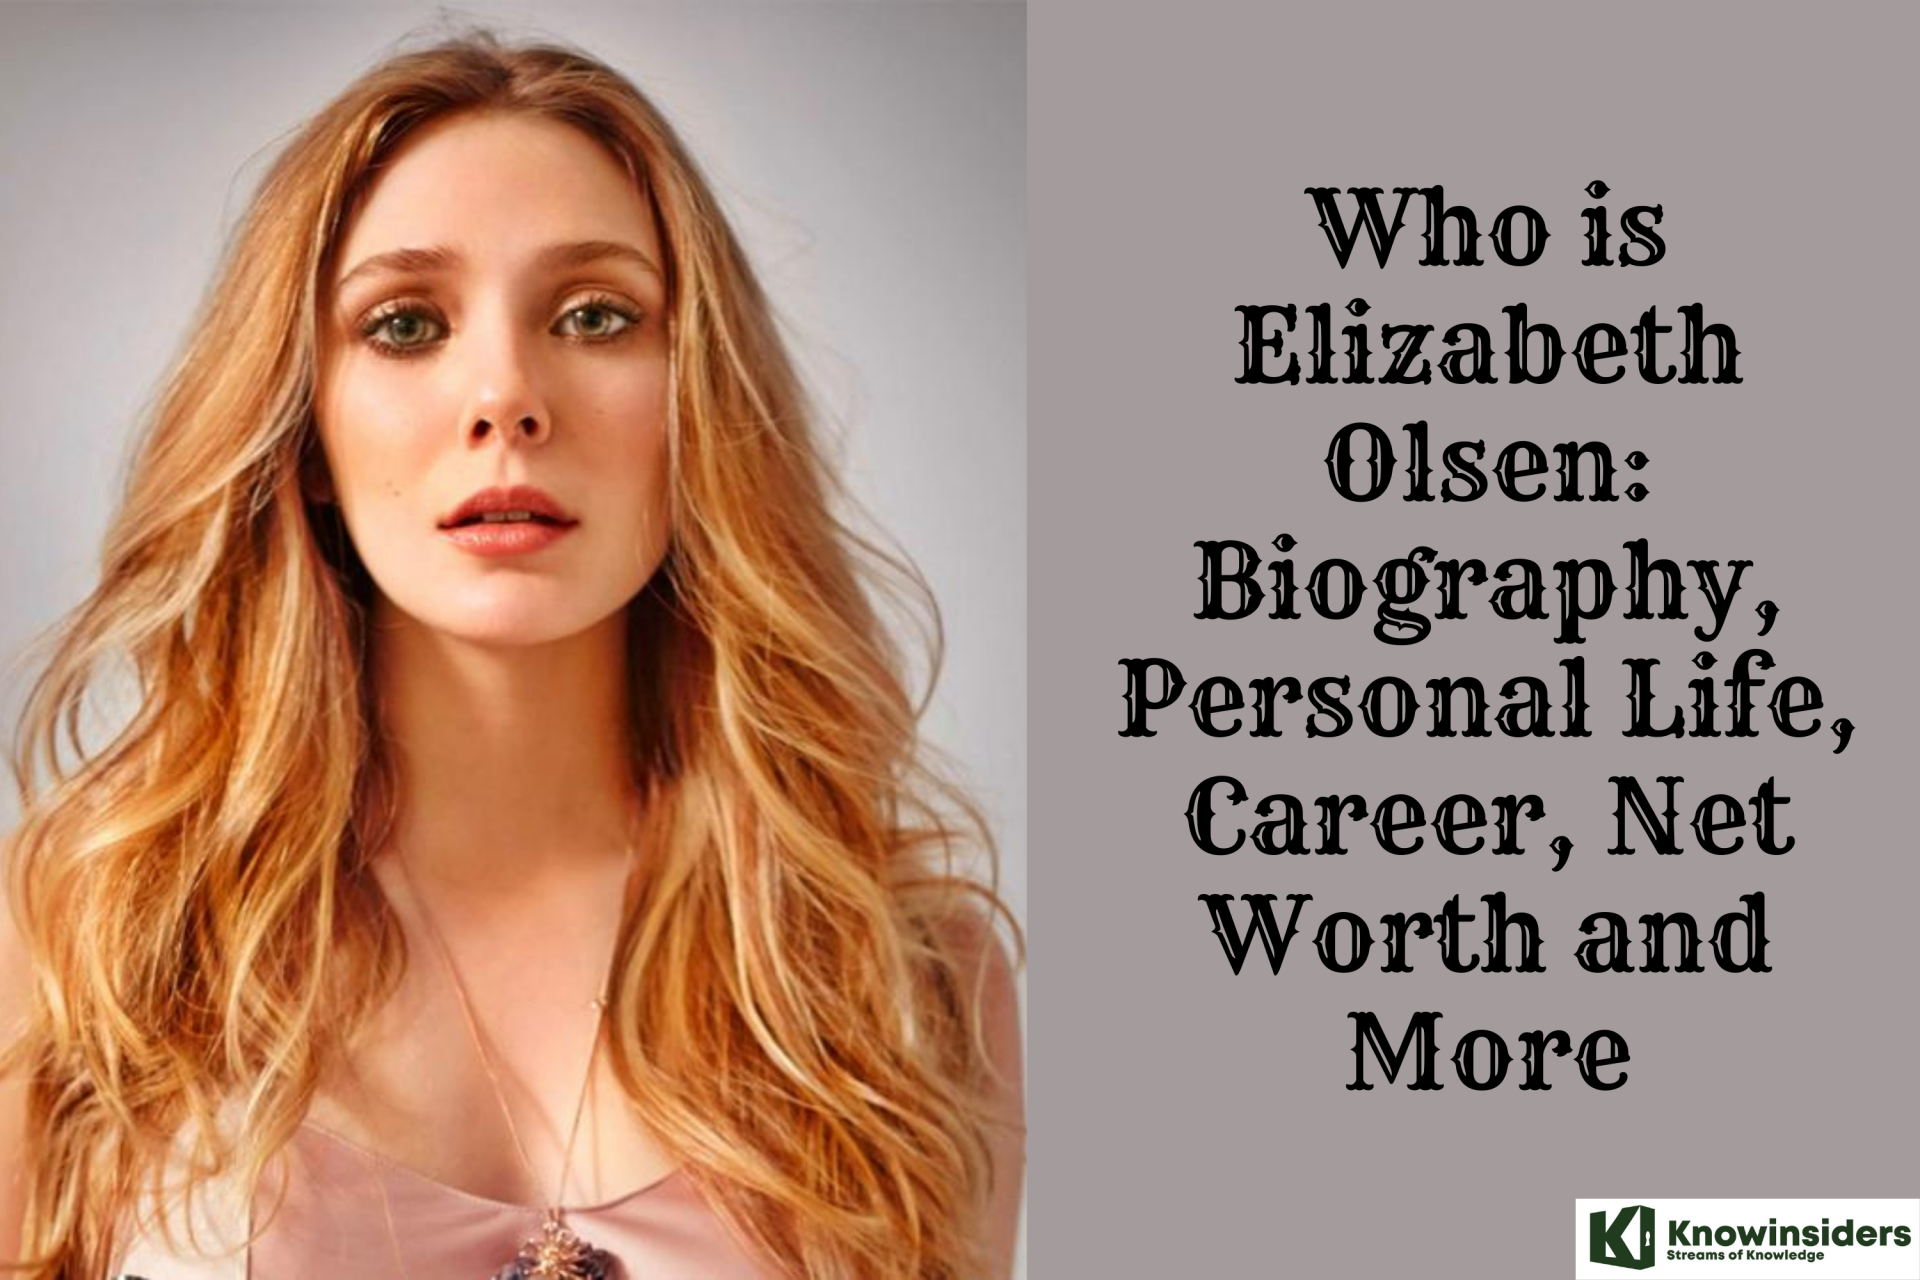 Who is Elizabeth Olsen: Biography, Personal Life, Career, Net Worth and More